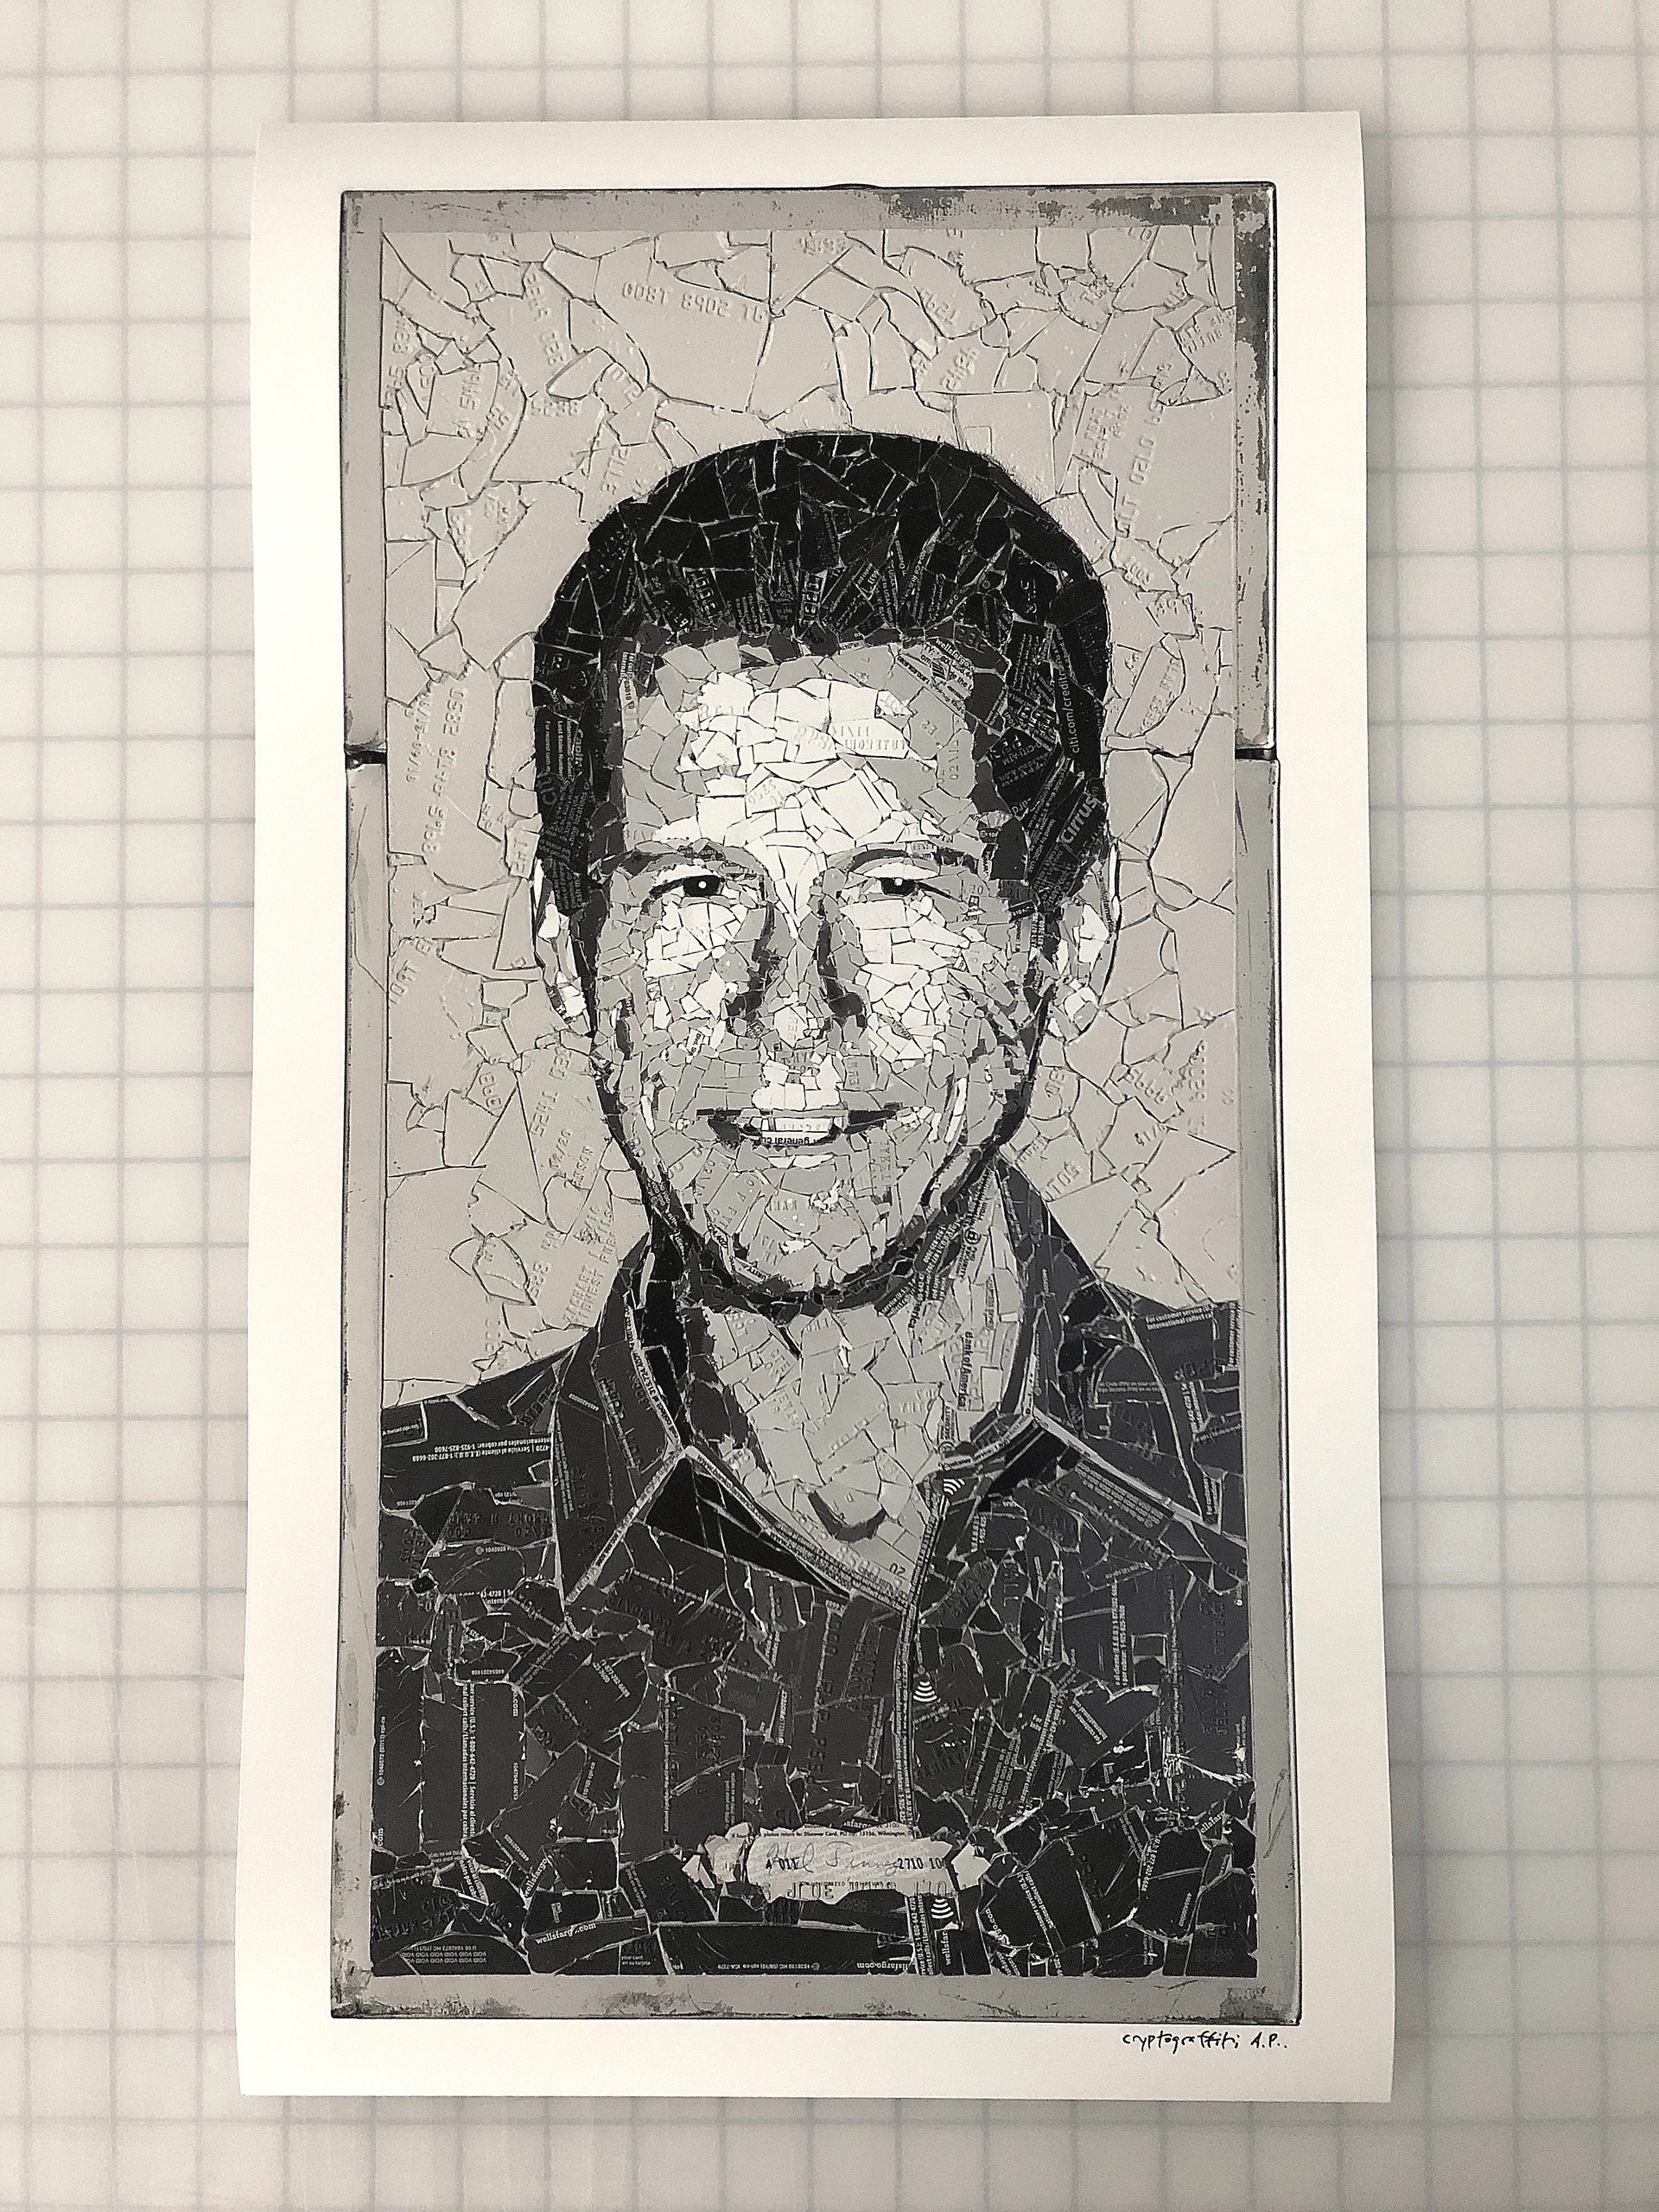 A monochromatic print with a portrait of a middle-aged white man as if seen through cracked glass